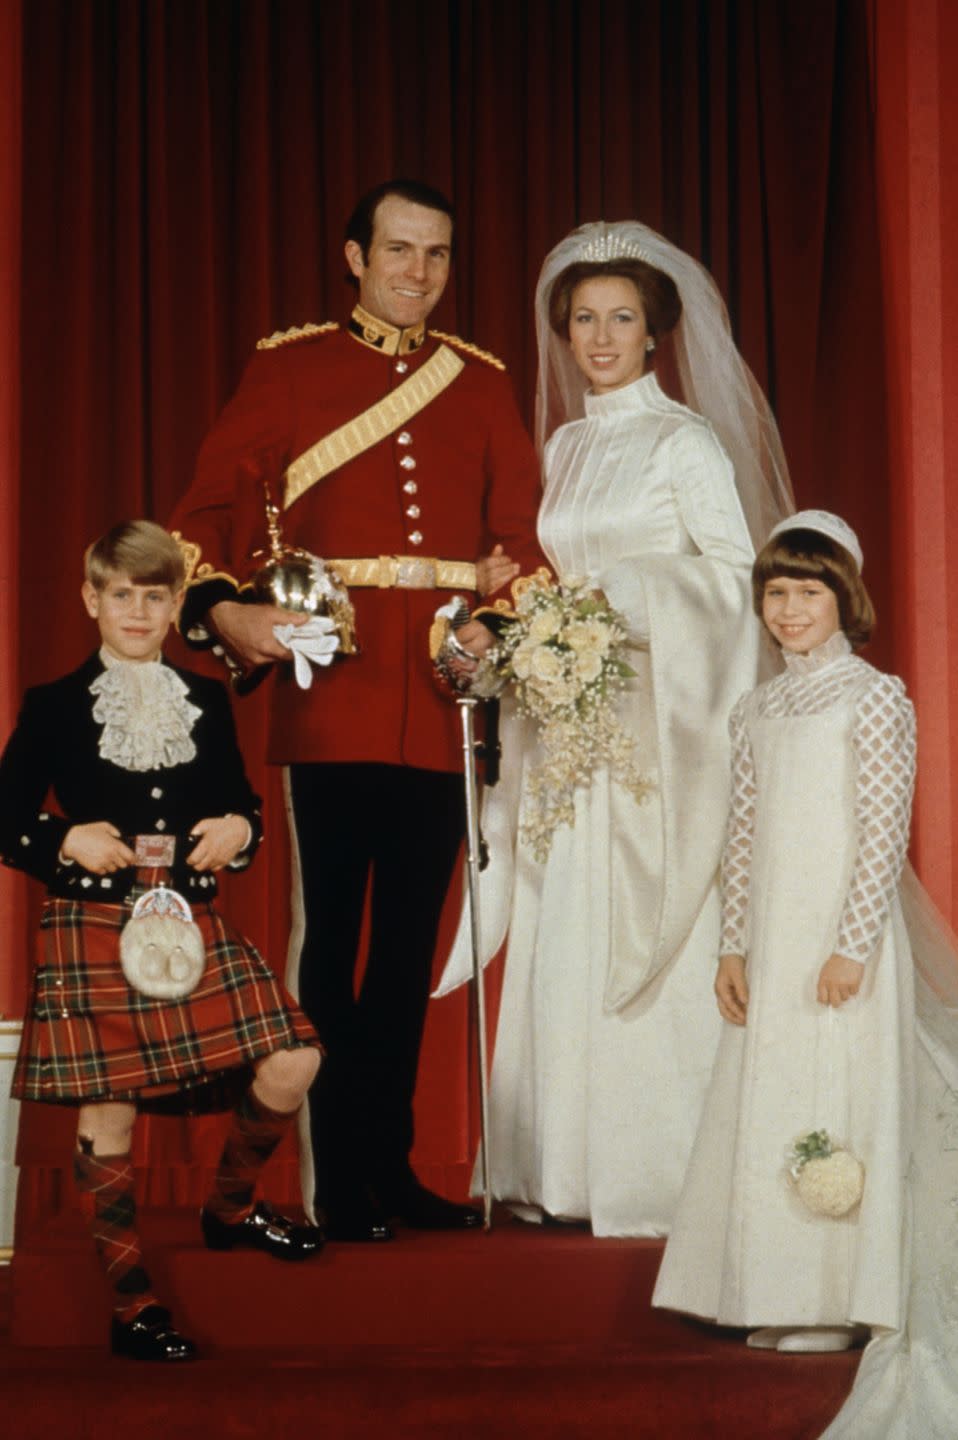 <p>Princess Anne looked regal on her wedding day in an embroidered Tudor-style dress, featuring a high neckline and long bell sleeves, which she wore for her Westminster Abbey nuptials to Mark Phillips. </p>